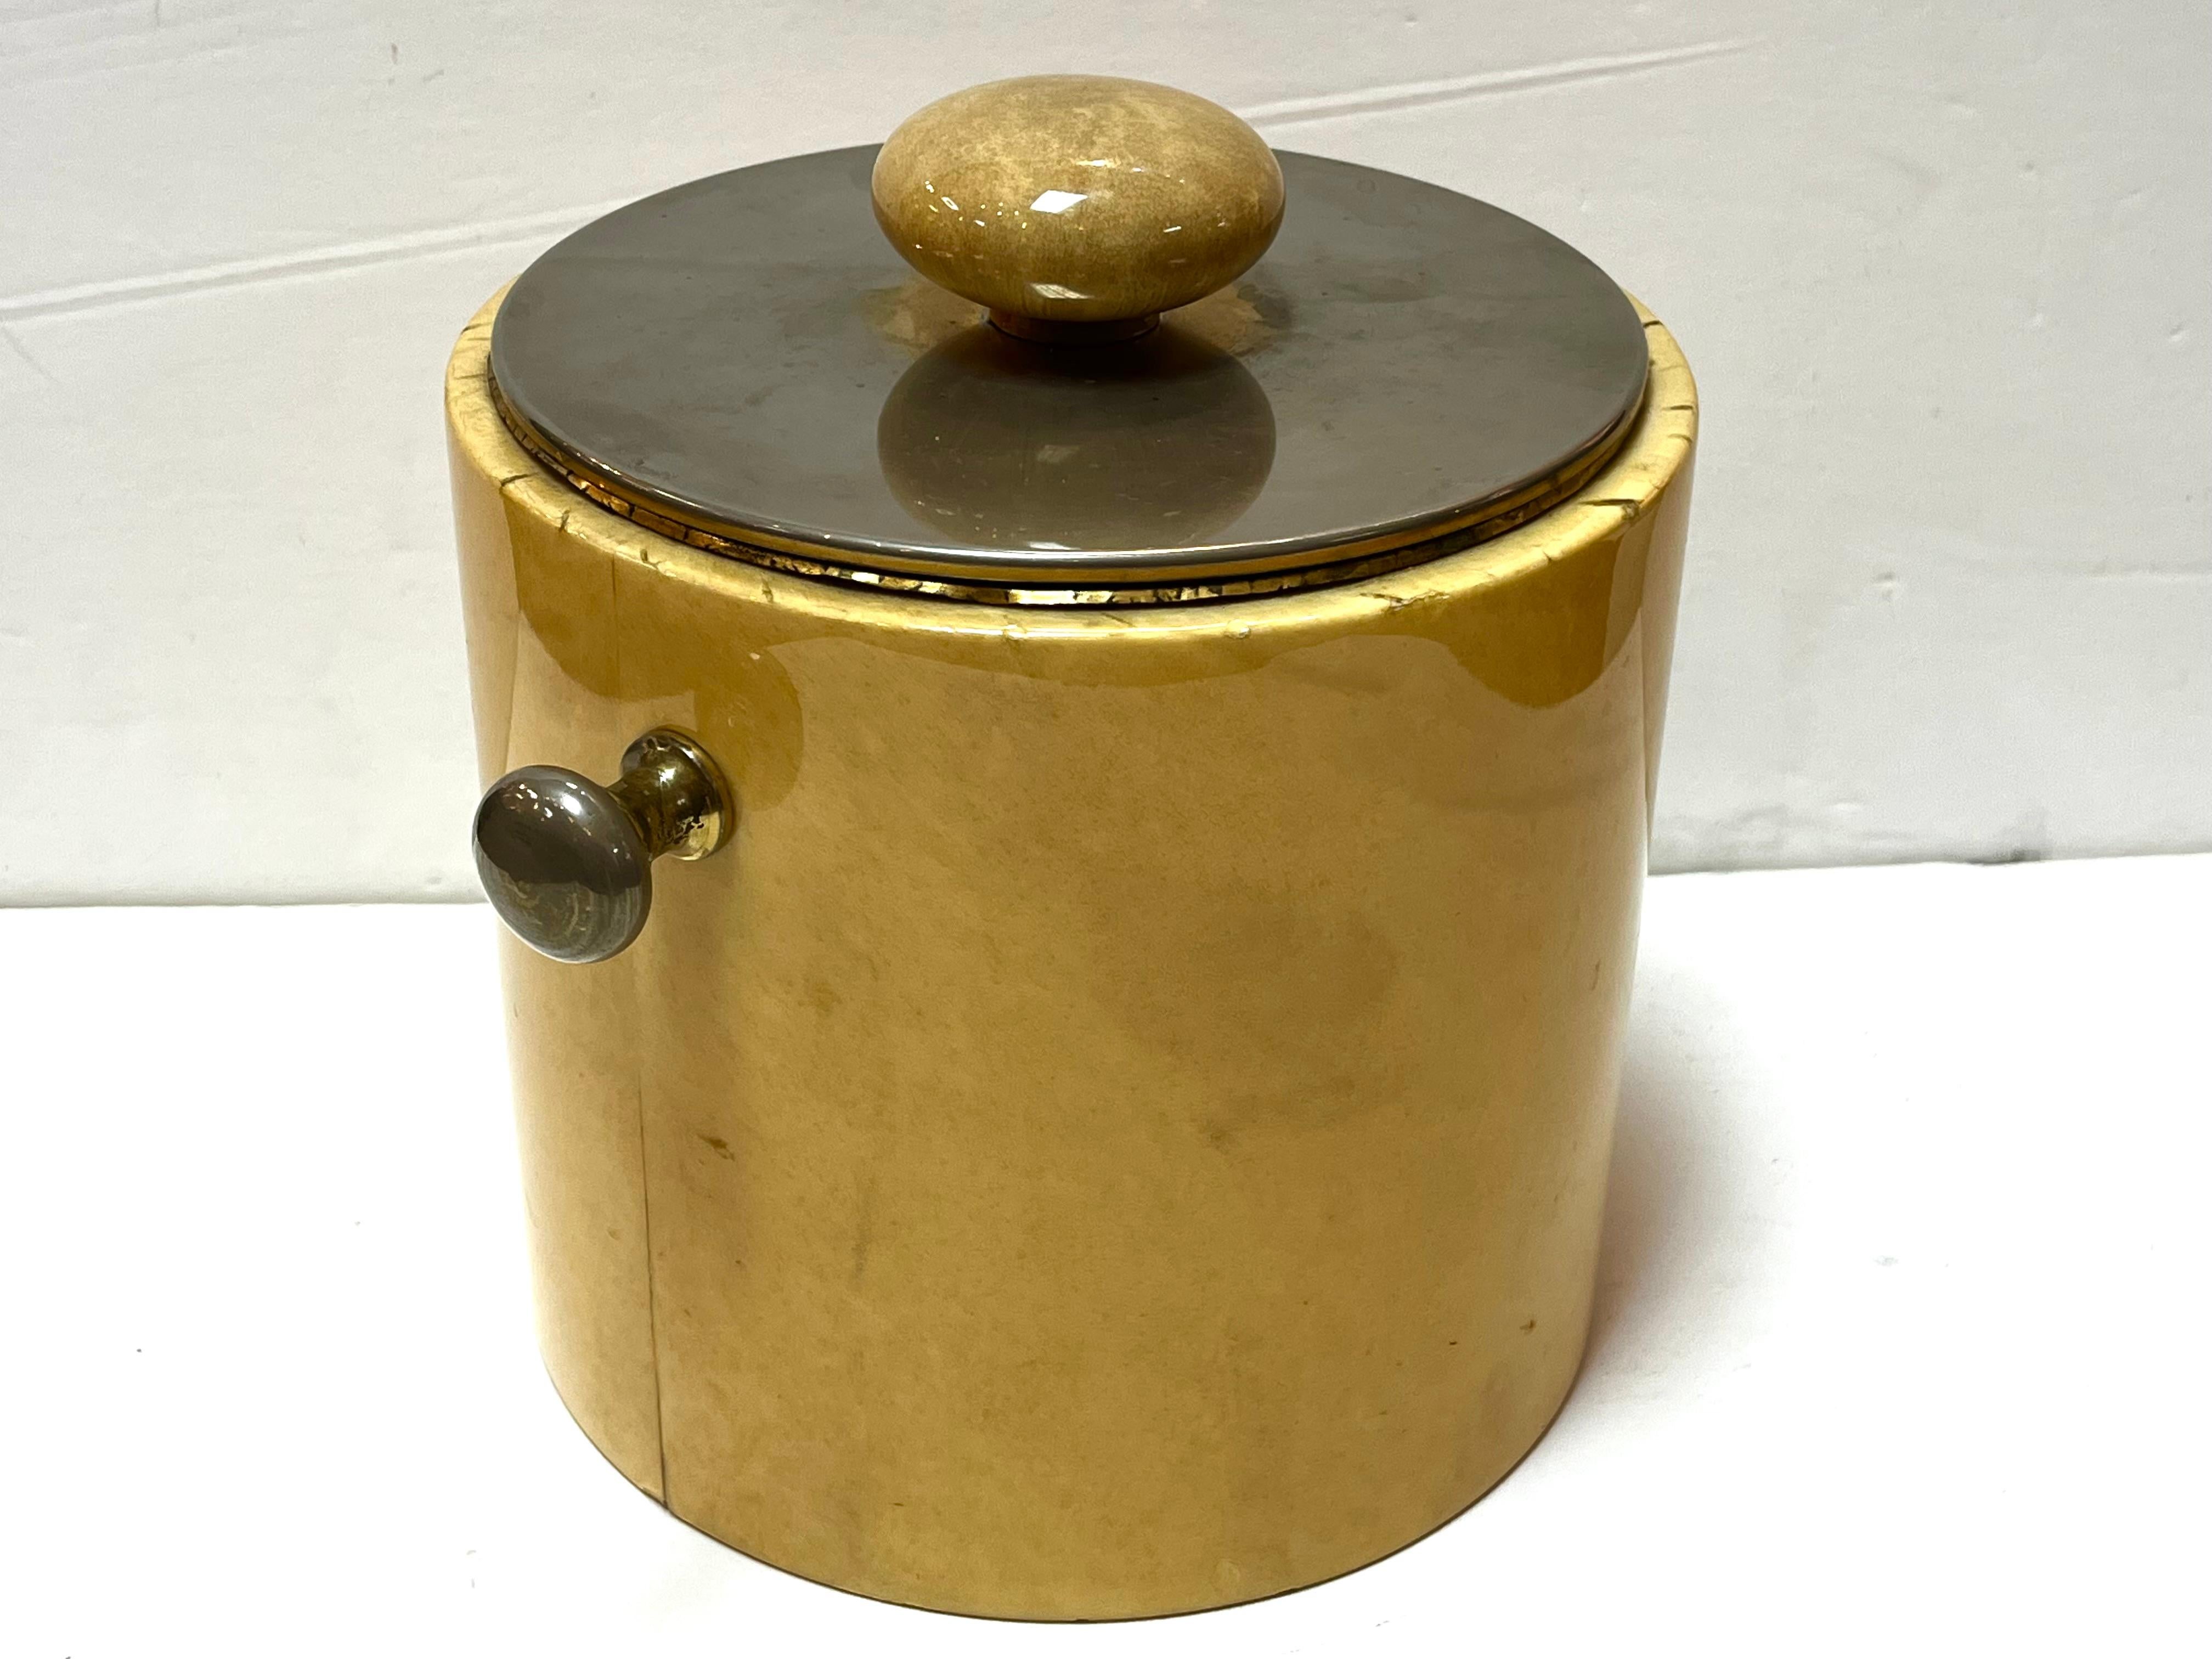 A mid century Aldo Tura ice bucket. Label on the bottom. This ice bucket features a metal lid with round handle as well as two smaller metal handles on either side of the ice bucket. From the artnet website, “Aldo Tura was an Italian furniture